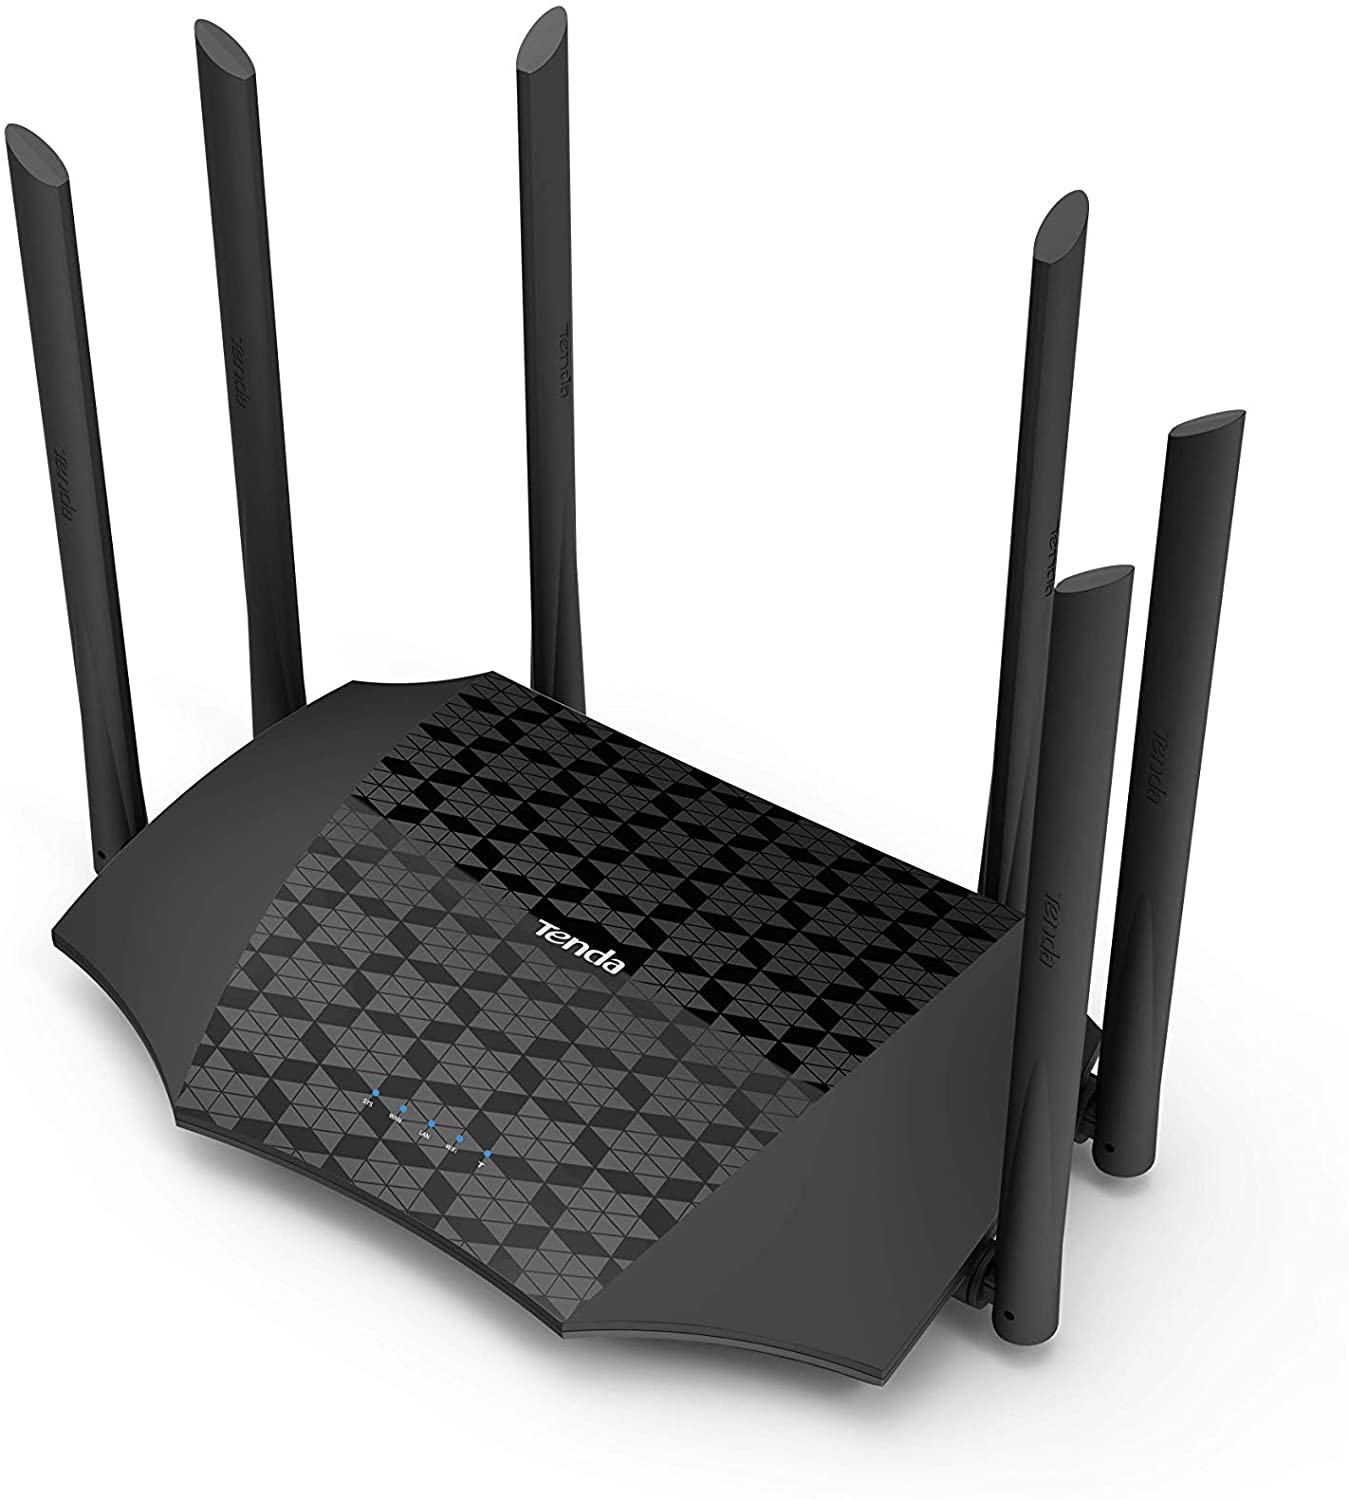 Dual Band WiFi Router, High Speed Wireless Internet Router with Smart App, MU-MIMO for Home